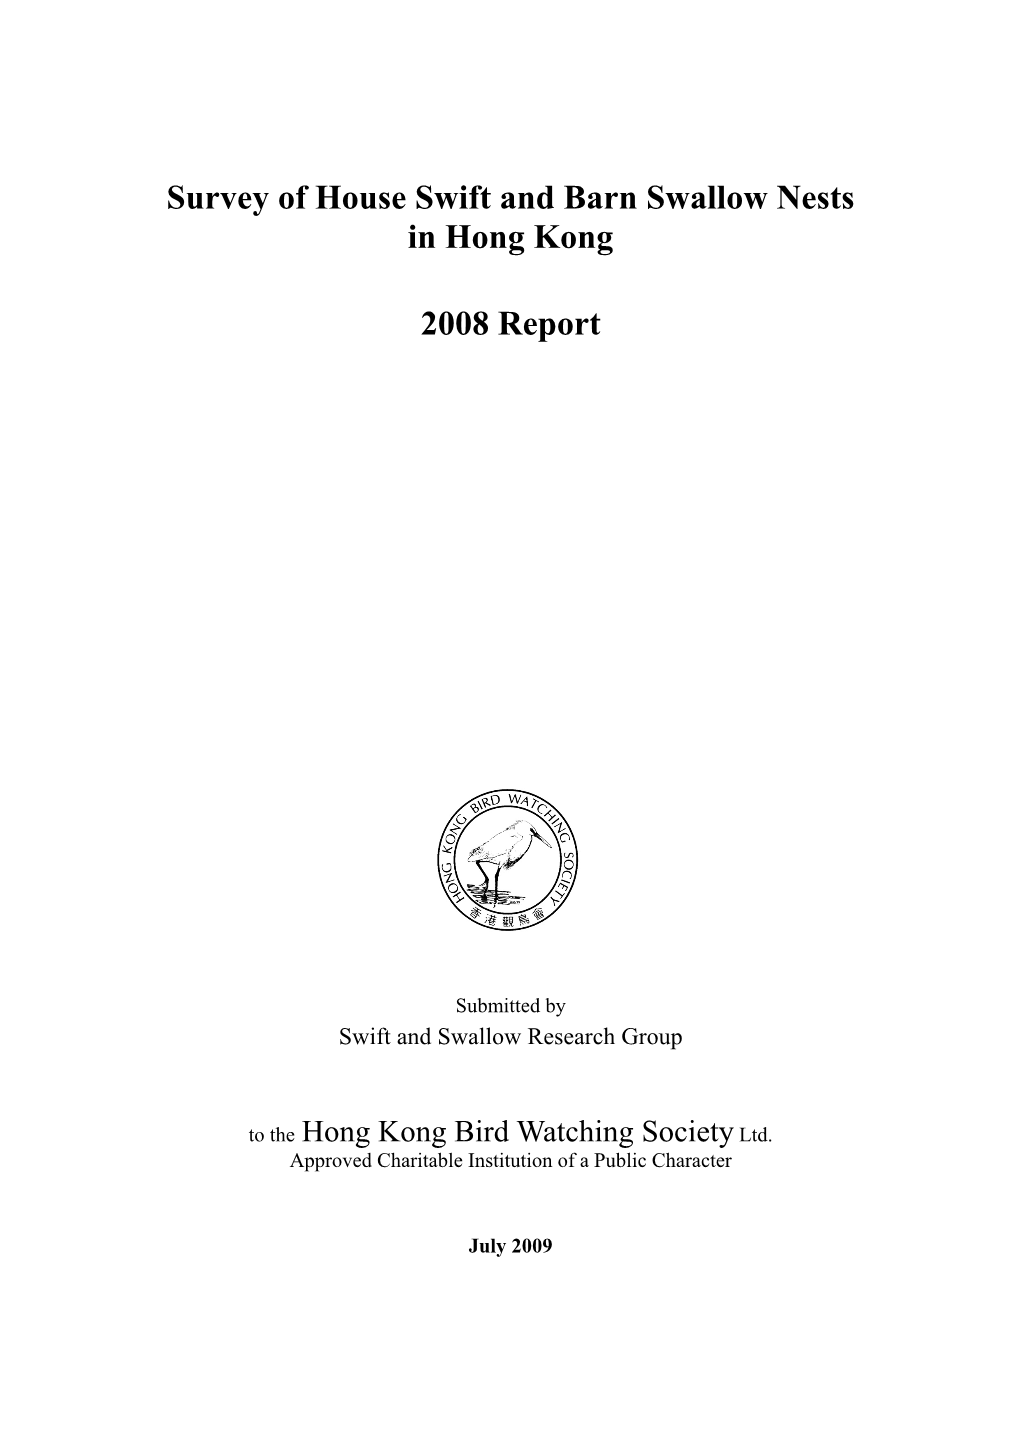 Survey of House Swift and Barn Swallow Nests in Hong Kong 2008